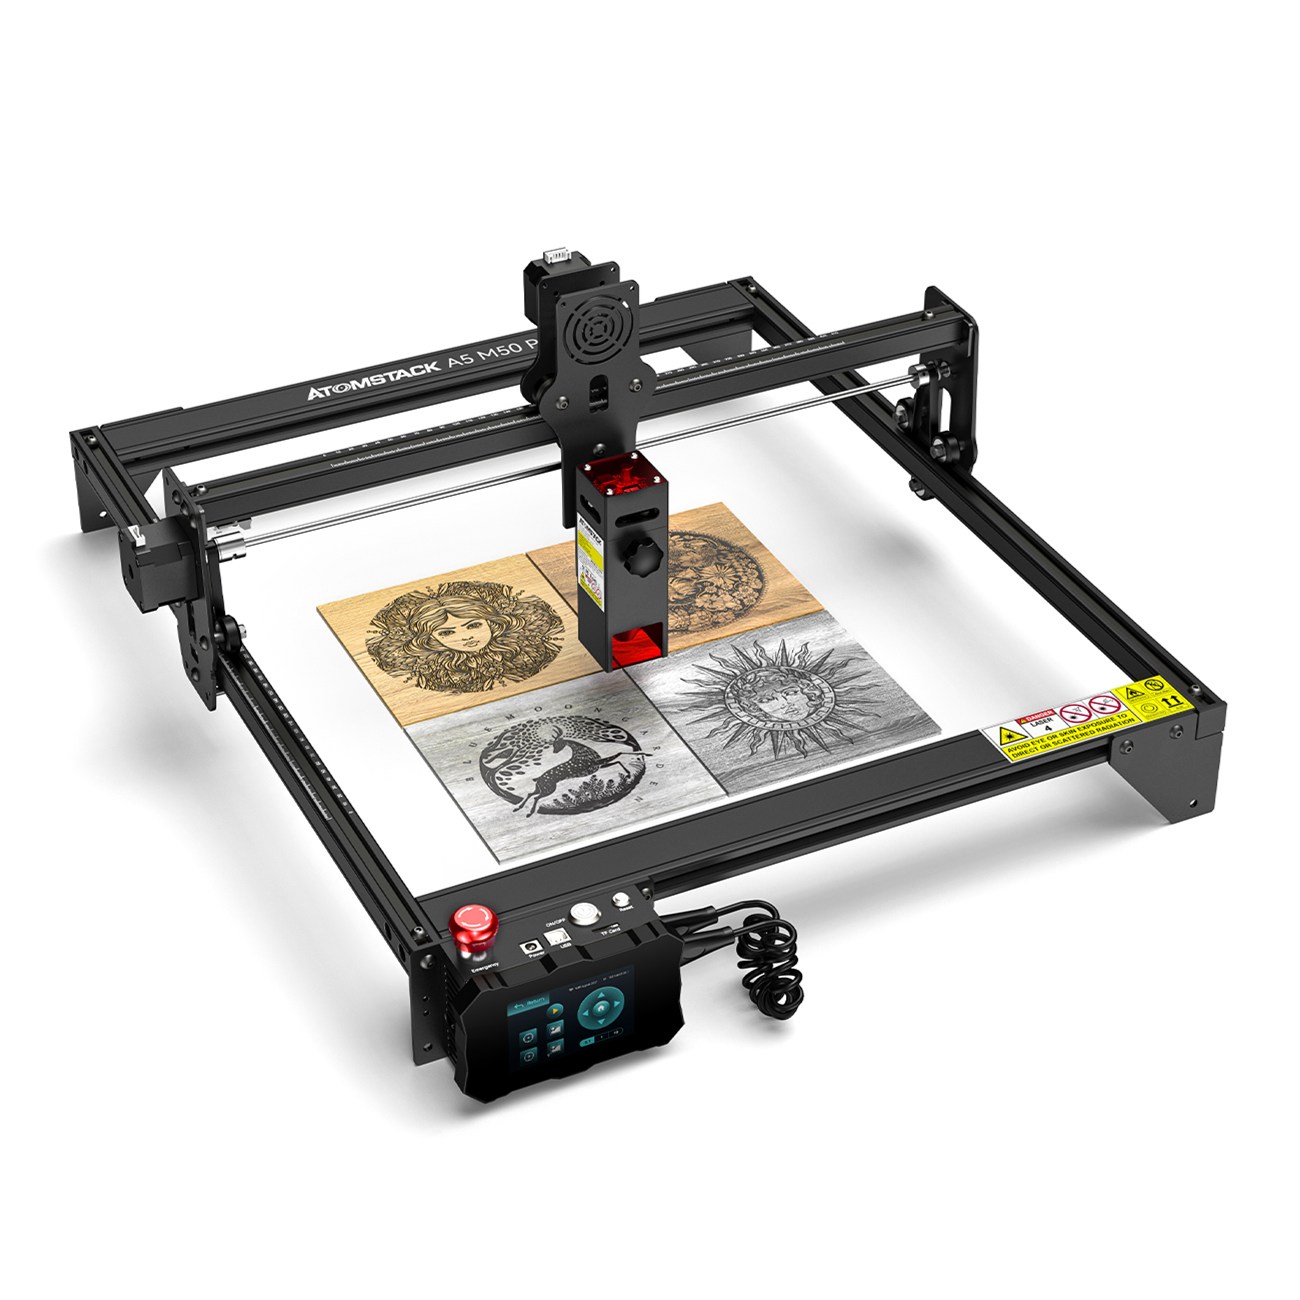 Find US DIRECT ATOMSTACK A5 M50 PRO APP Control Dual Laser Laser Engraving Cutting Machine Laser Engraver Cutter 5 5W Output Power Fixed Focus 304 Mirror Stainless Steel Engraving DIY Laser Marking for Metal Wood Leather Vinyl Support Offline Engraving for Sale on Gipsybee.com with cryptocurrencies